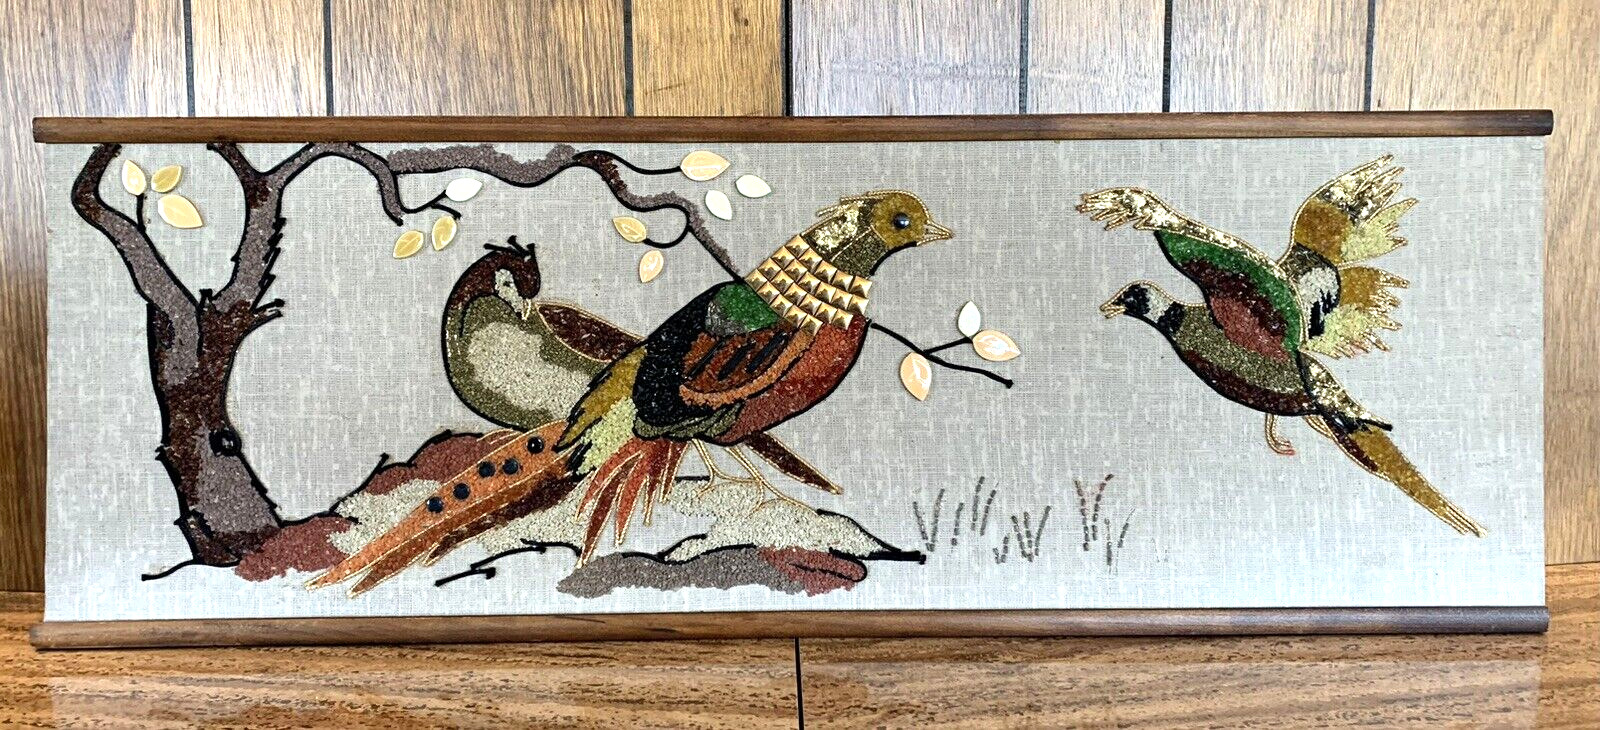 Colorful Vintage MCM Gravel Art: 3 Pheasants with Gold Tiles, Leaves, and Beads